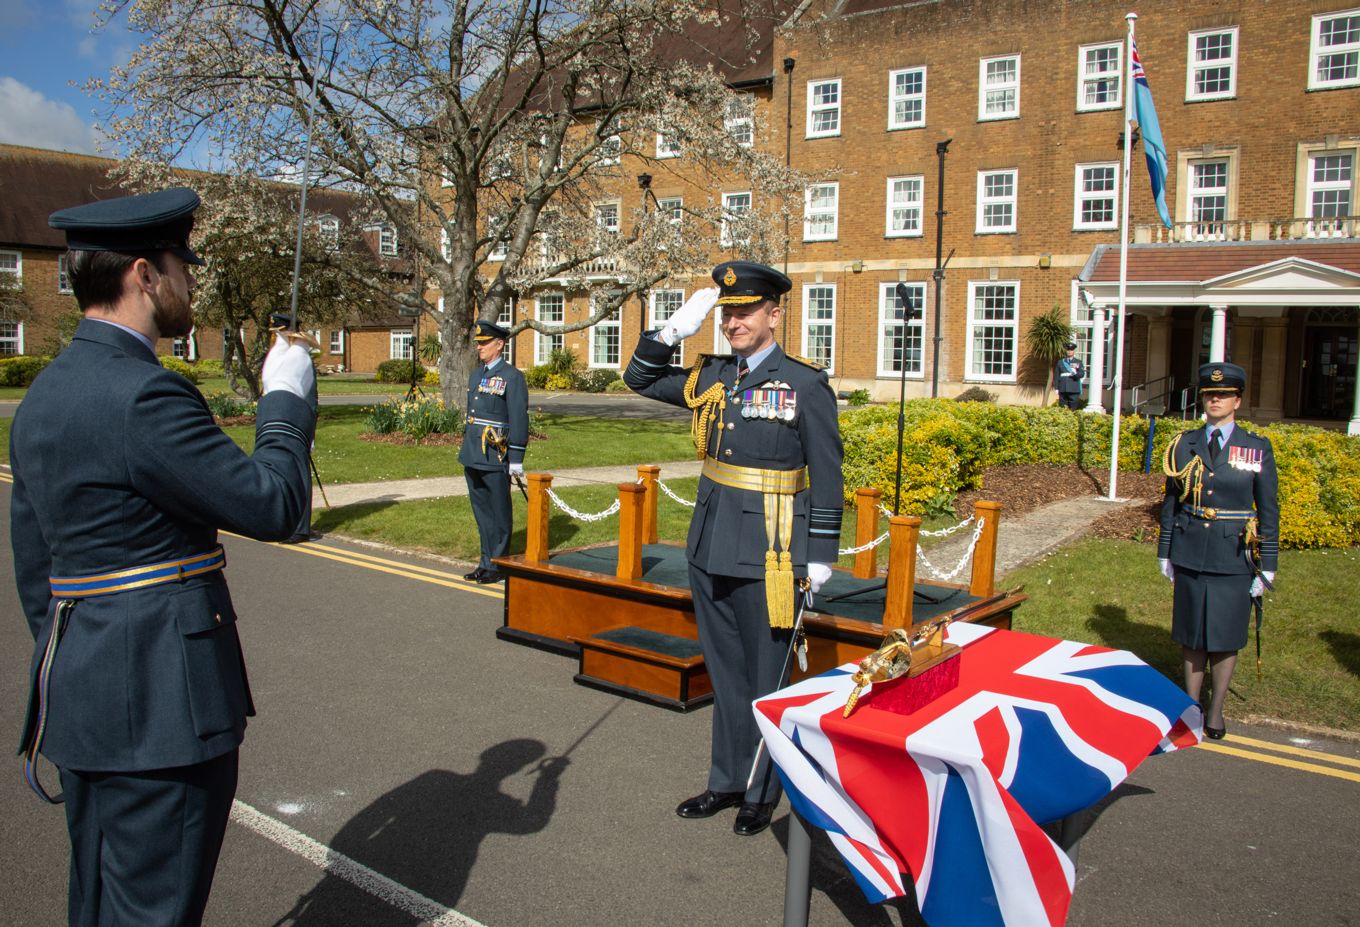 Flight Lieutenant Ben Burton, Parade Commander, salutes Chief of the Air Staff, Air Chief Marshal Sir Mike Wigston KCB CBE ADC, prior to receiving the Firmin Sword of Peace